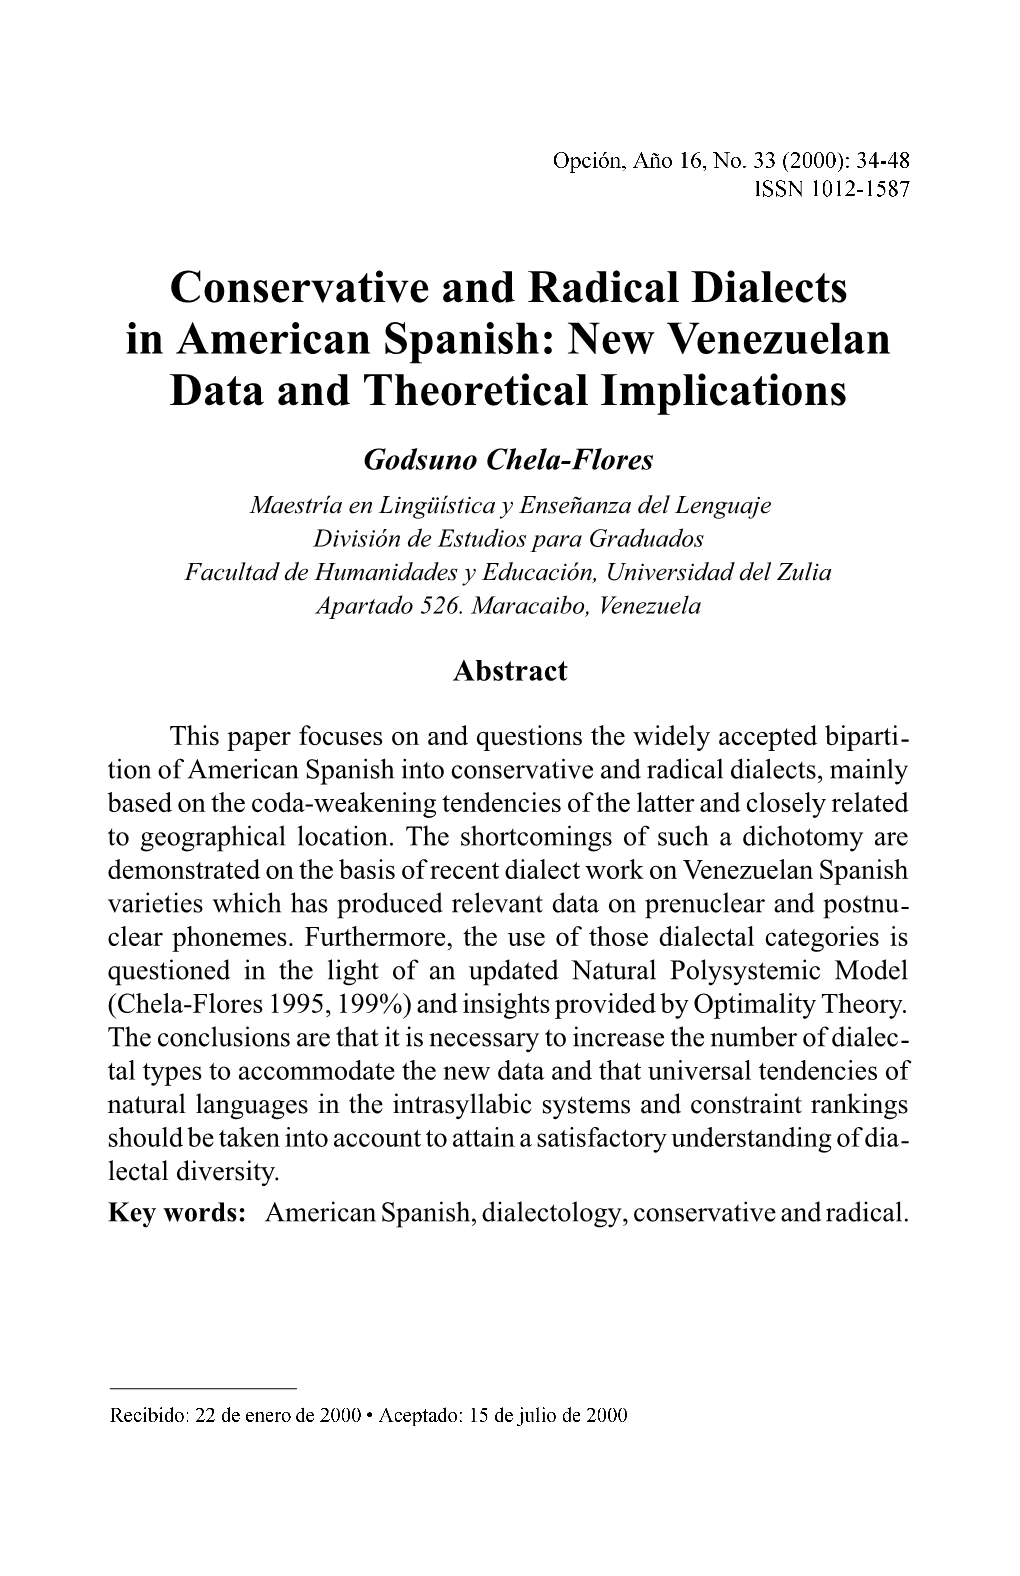 Conservative and Radical Dialects in American Spanish: New Venezuelan Data and Theoretical Implications